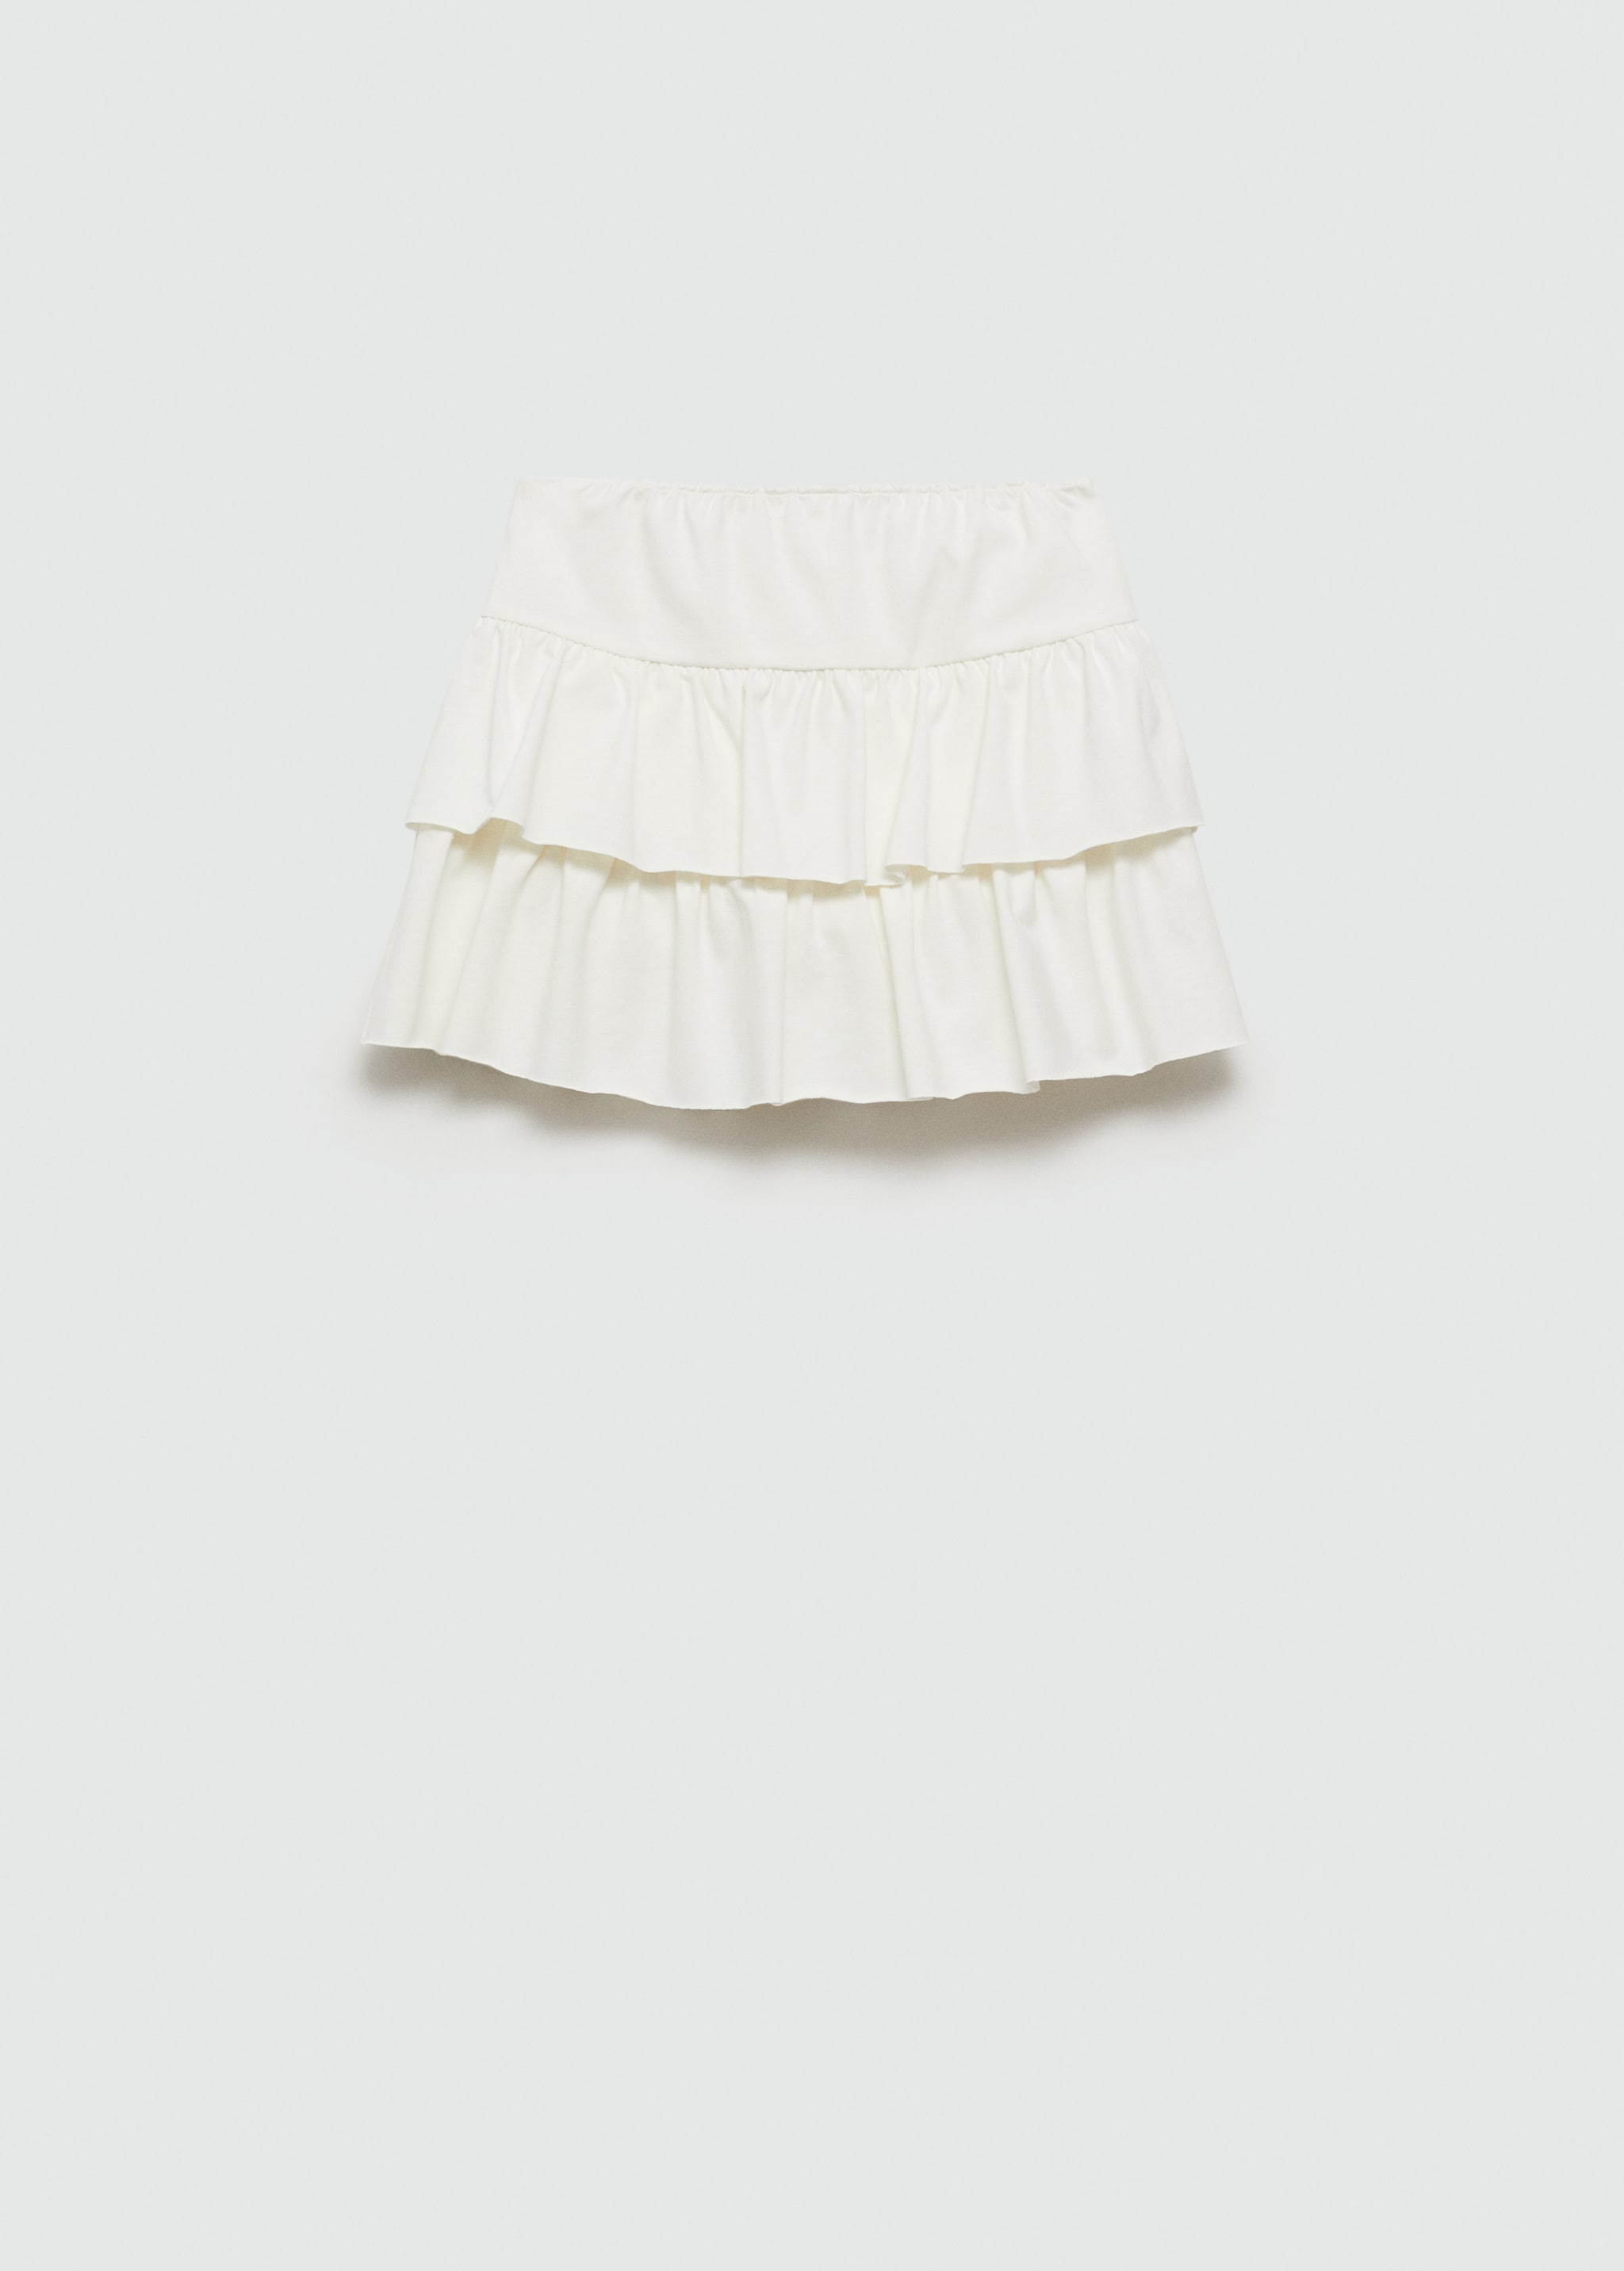 Ruffled trouser skirt - Article without model